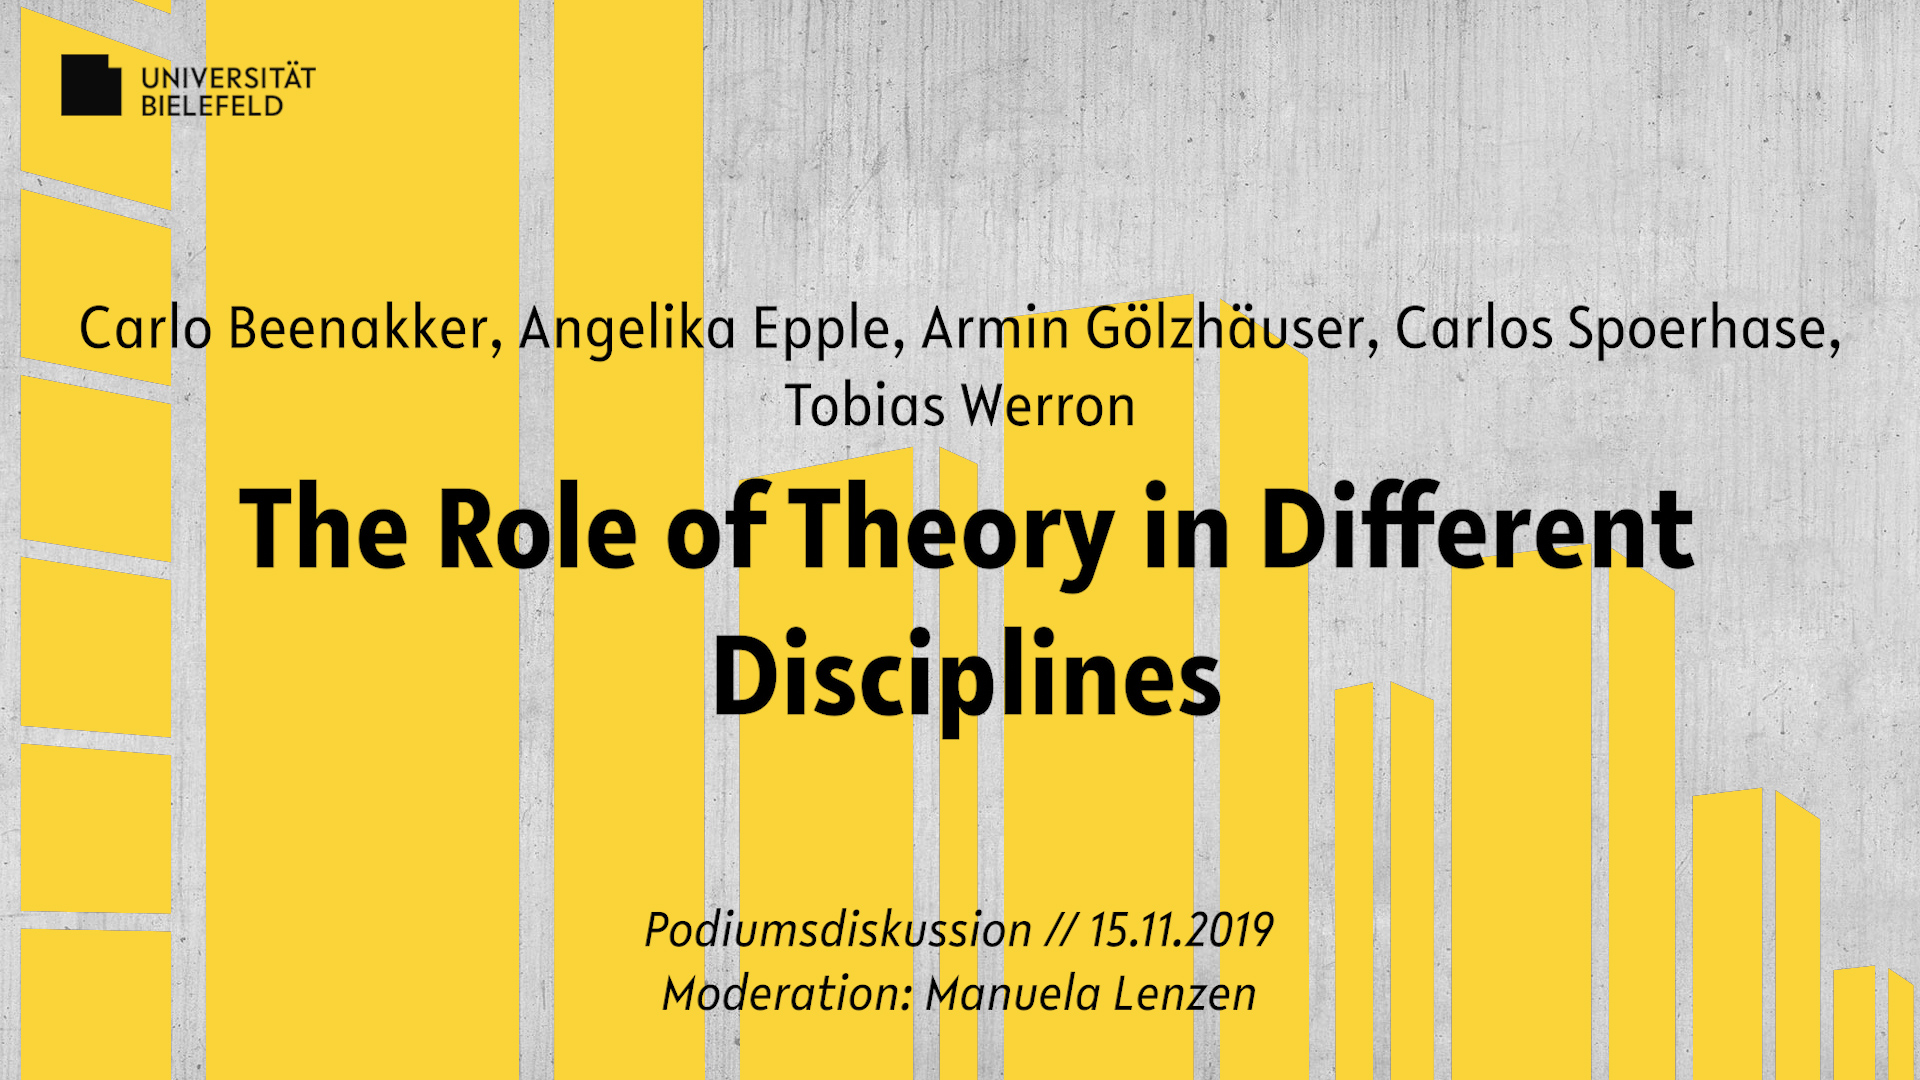 The Role of Theory in Different Disciplines